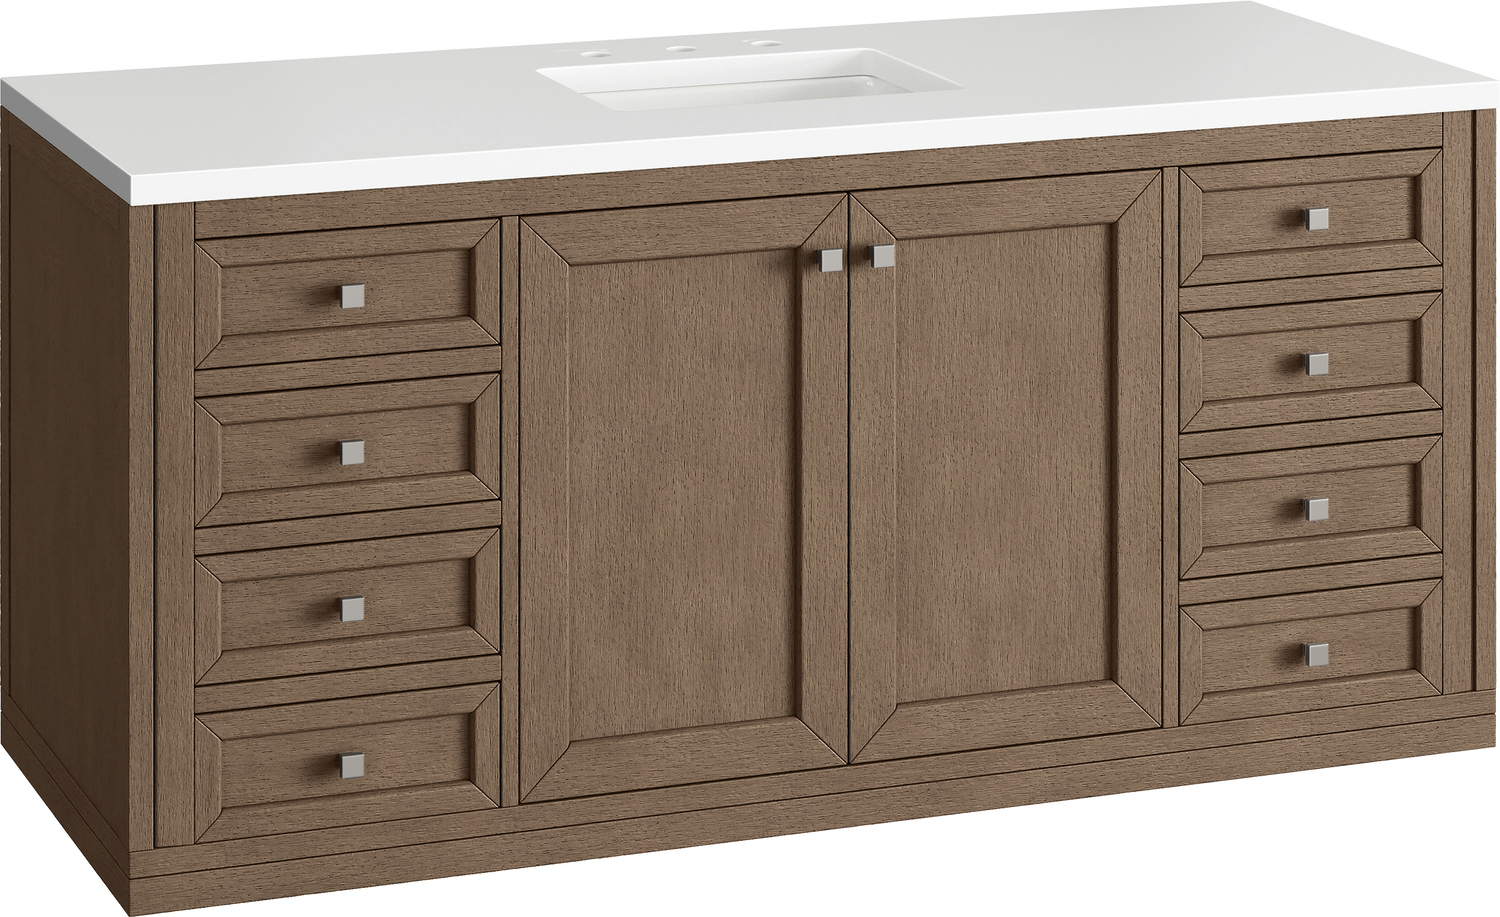 60 double vanity with top James Martin Vanity Whitewashed Walnut Contemporary/Modern, Transitional